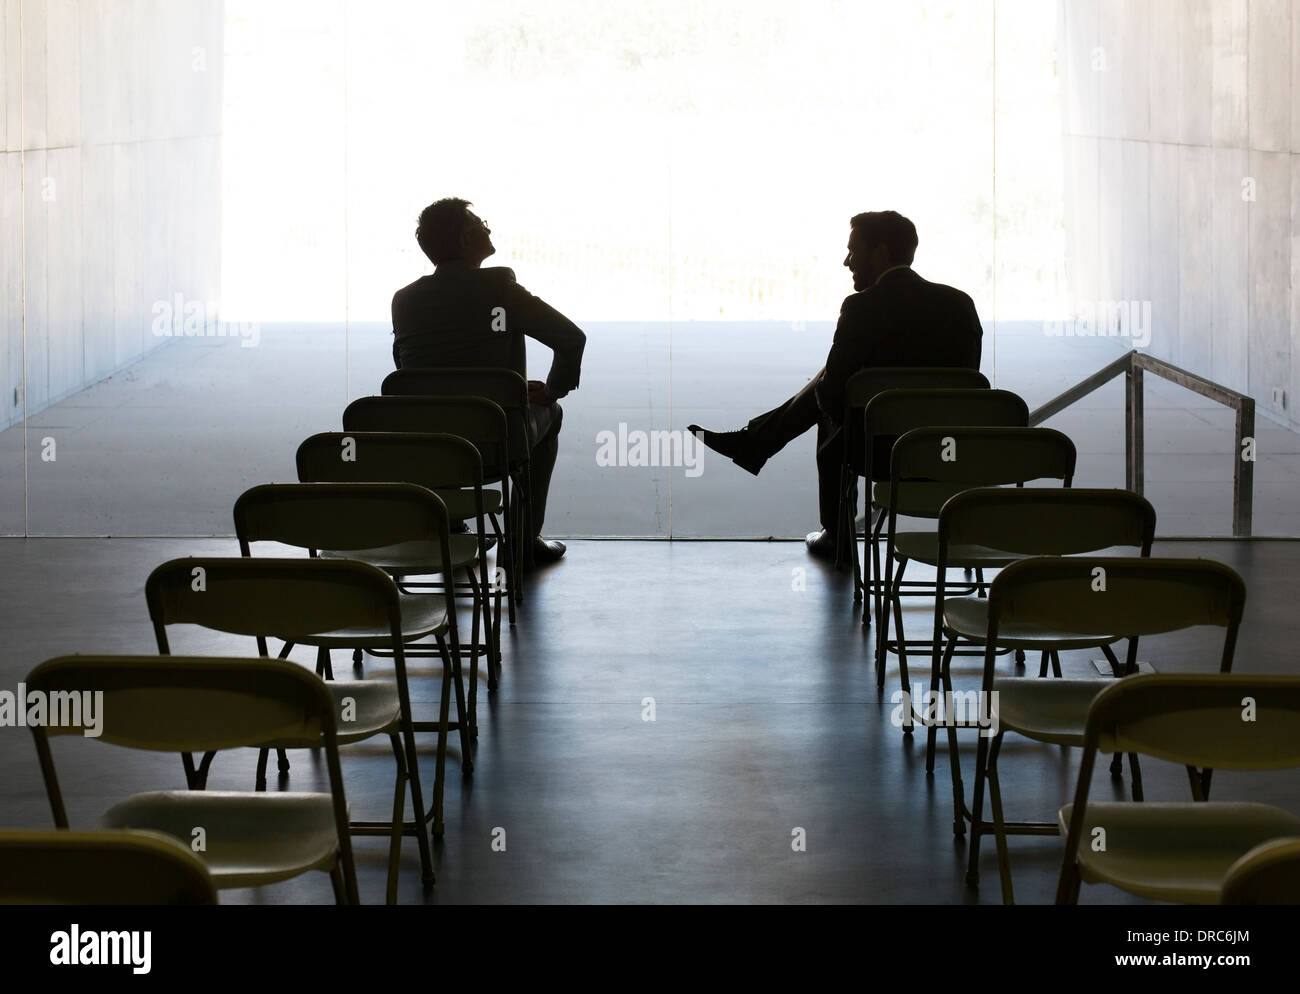 Businessmen talking at chairs in a row Stock Photo